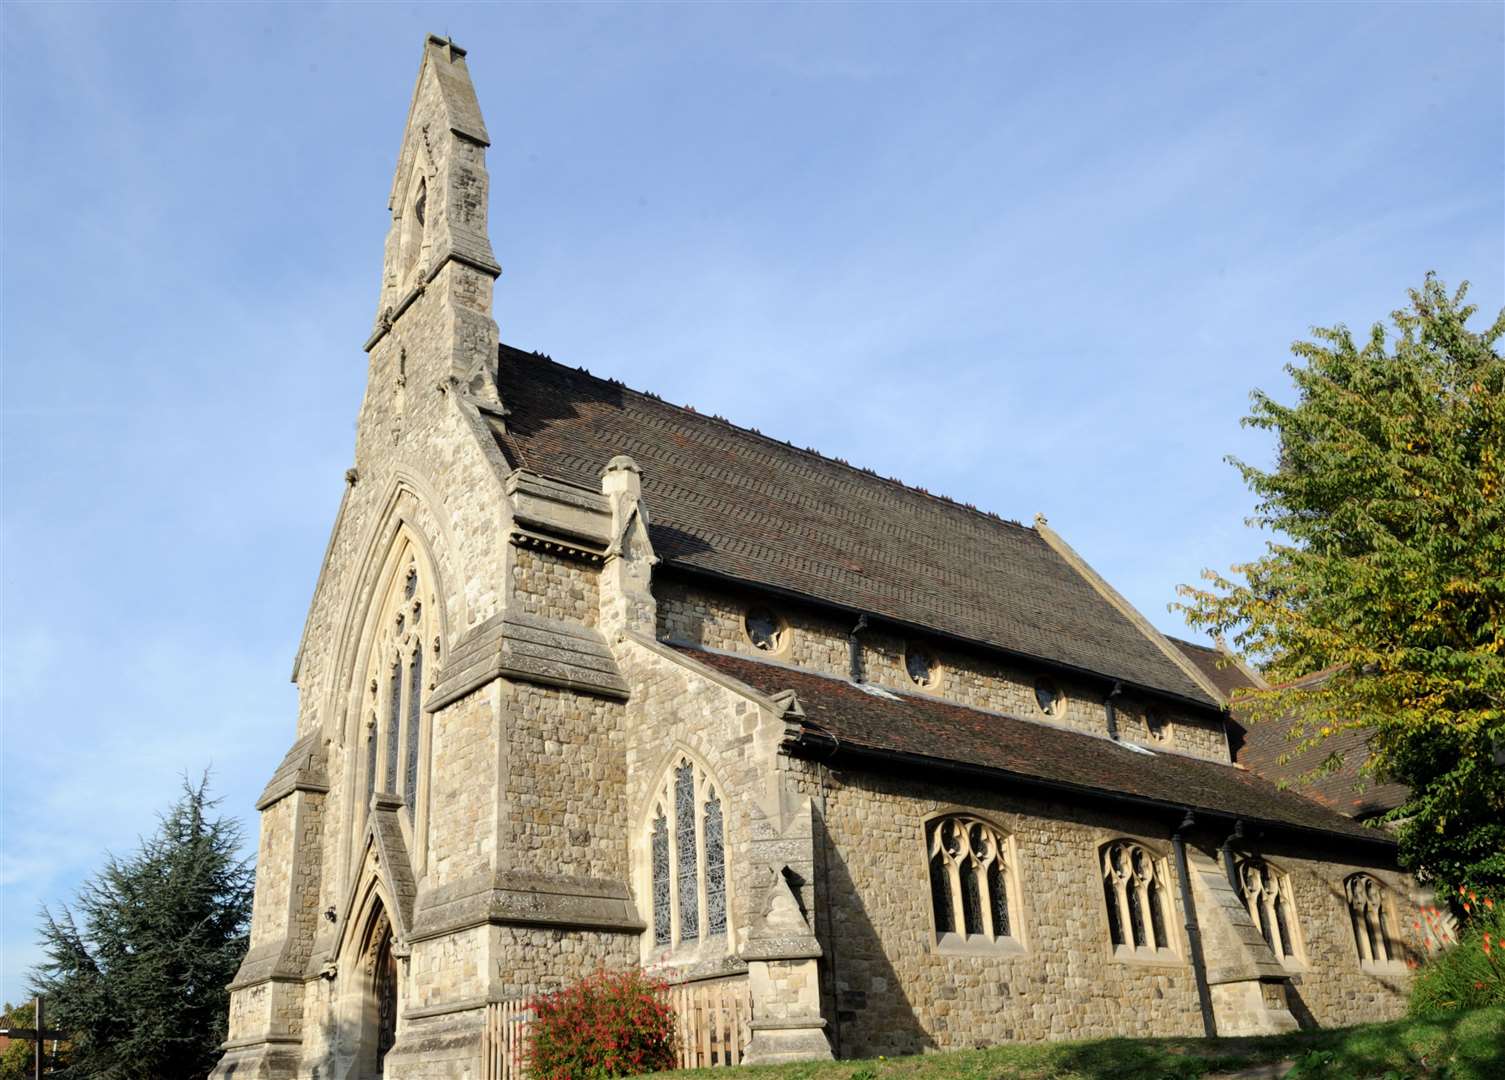 St Mary’s Church in Greenhithe has funding to repair its roof